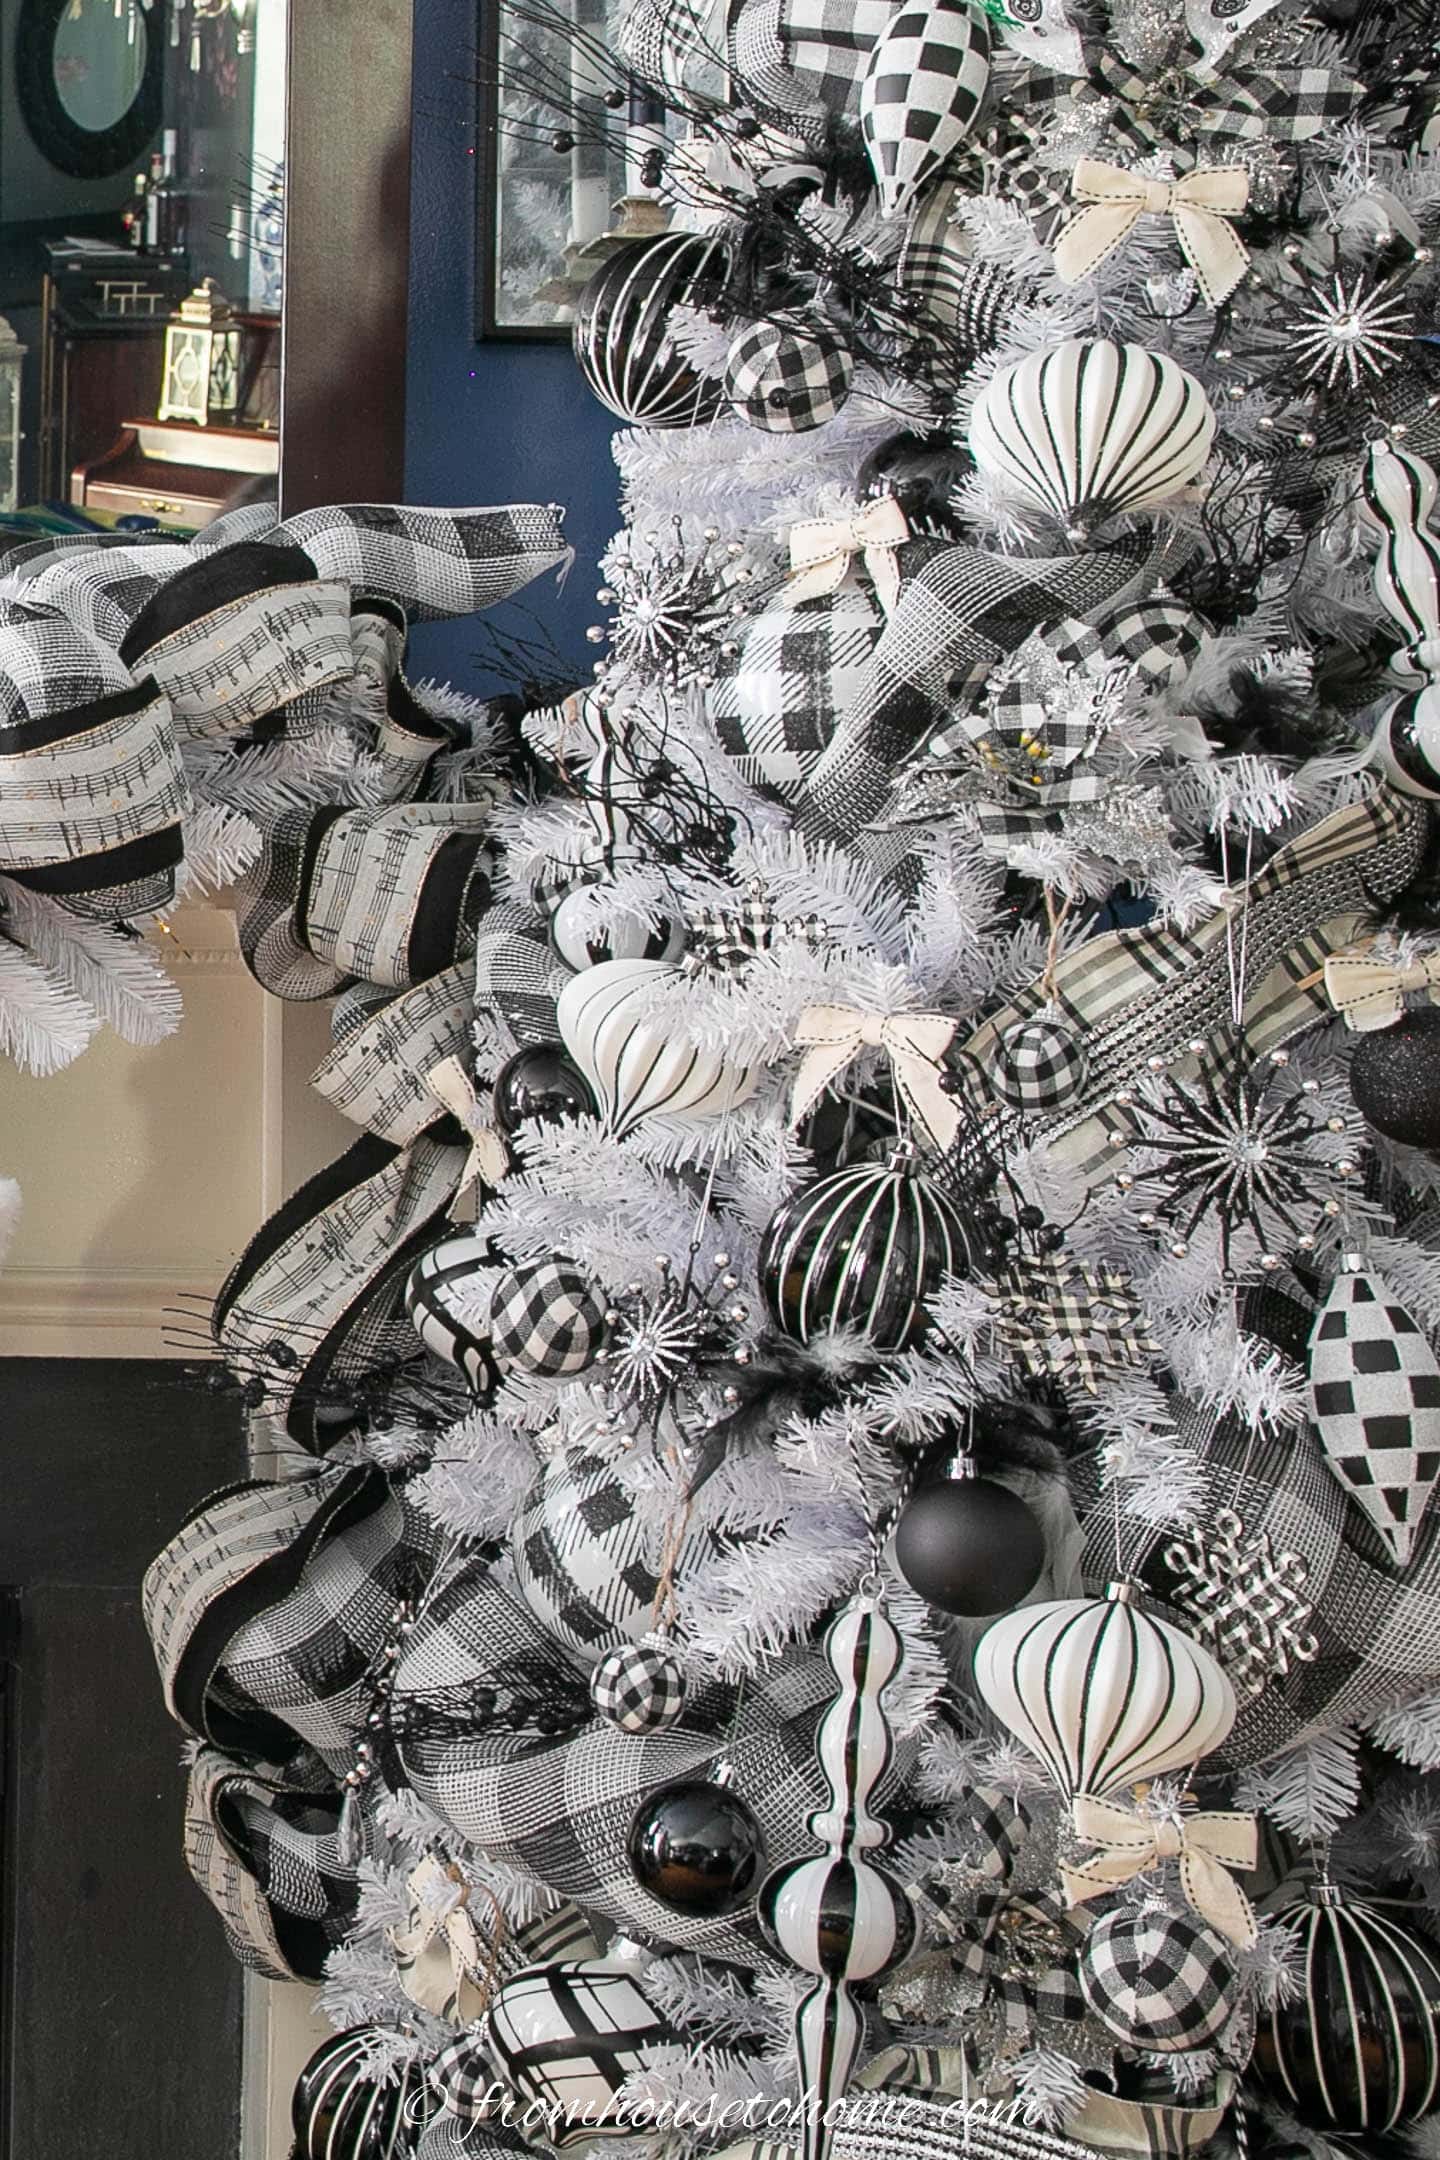 Black and white ornaments on a white Christmas tree